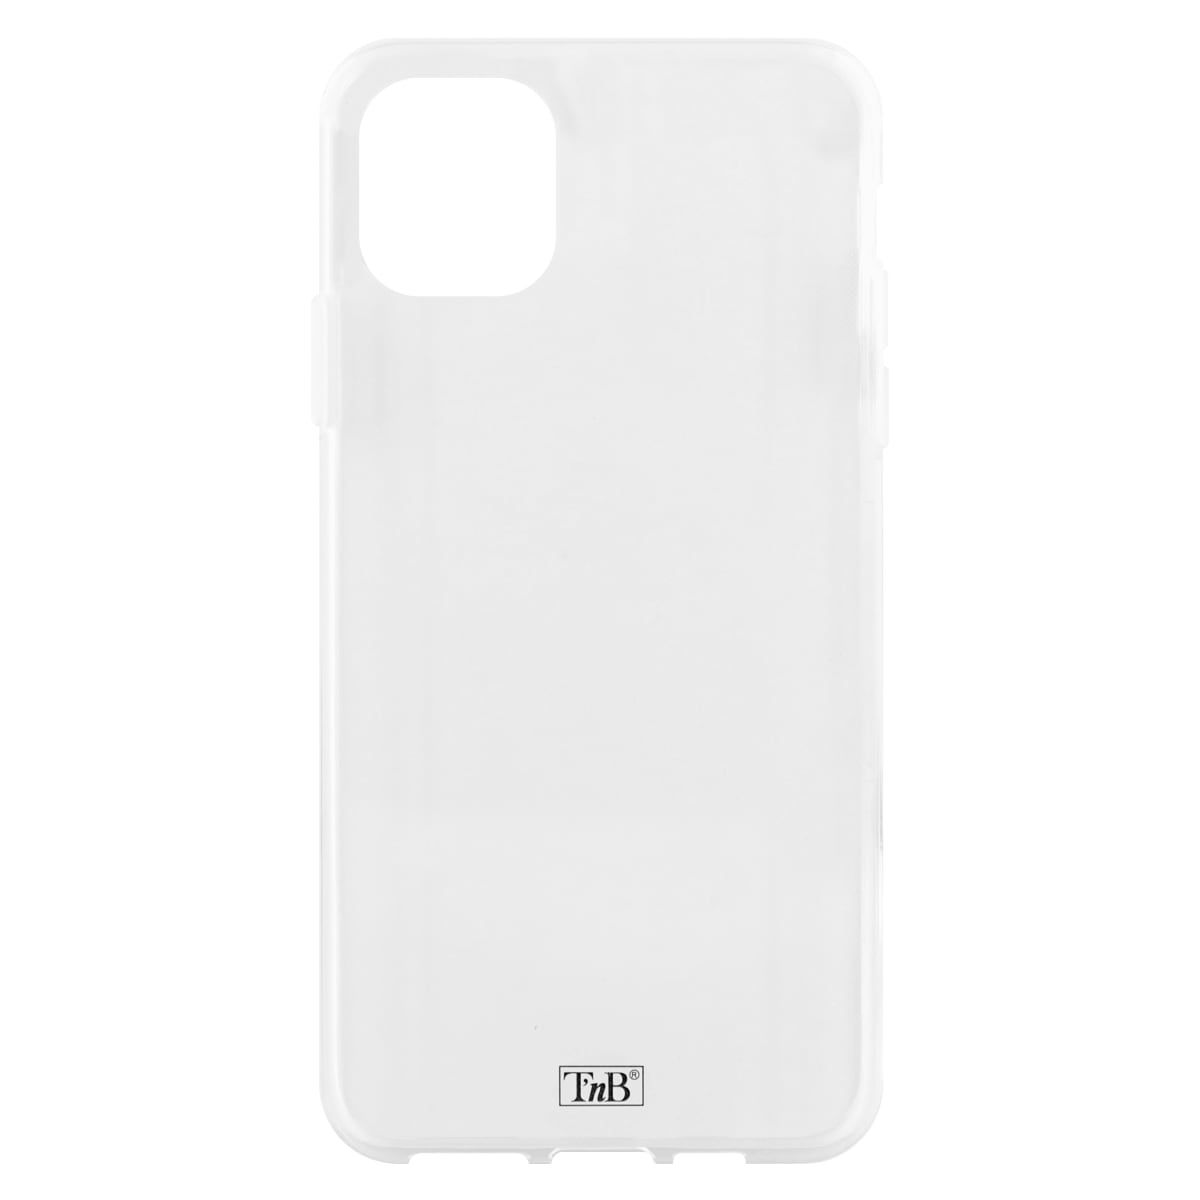 Soft case for IPhone 11 Pro Max.